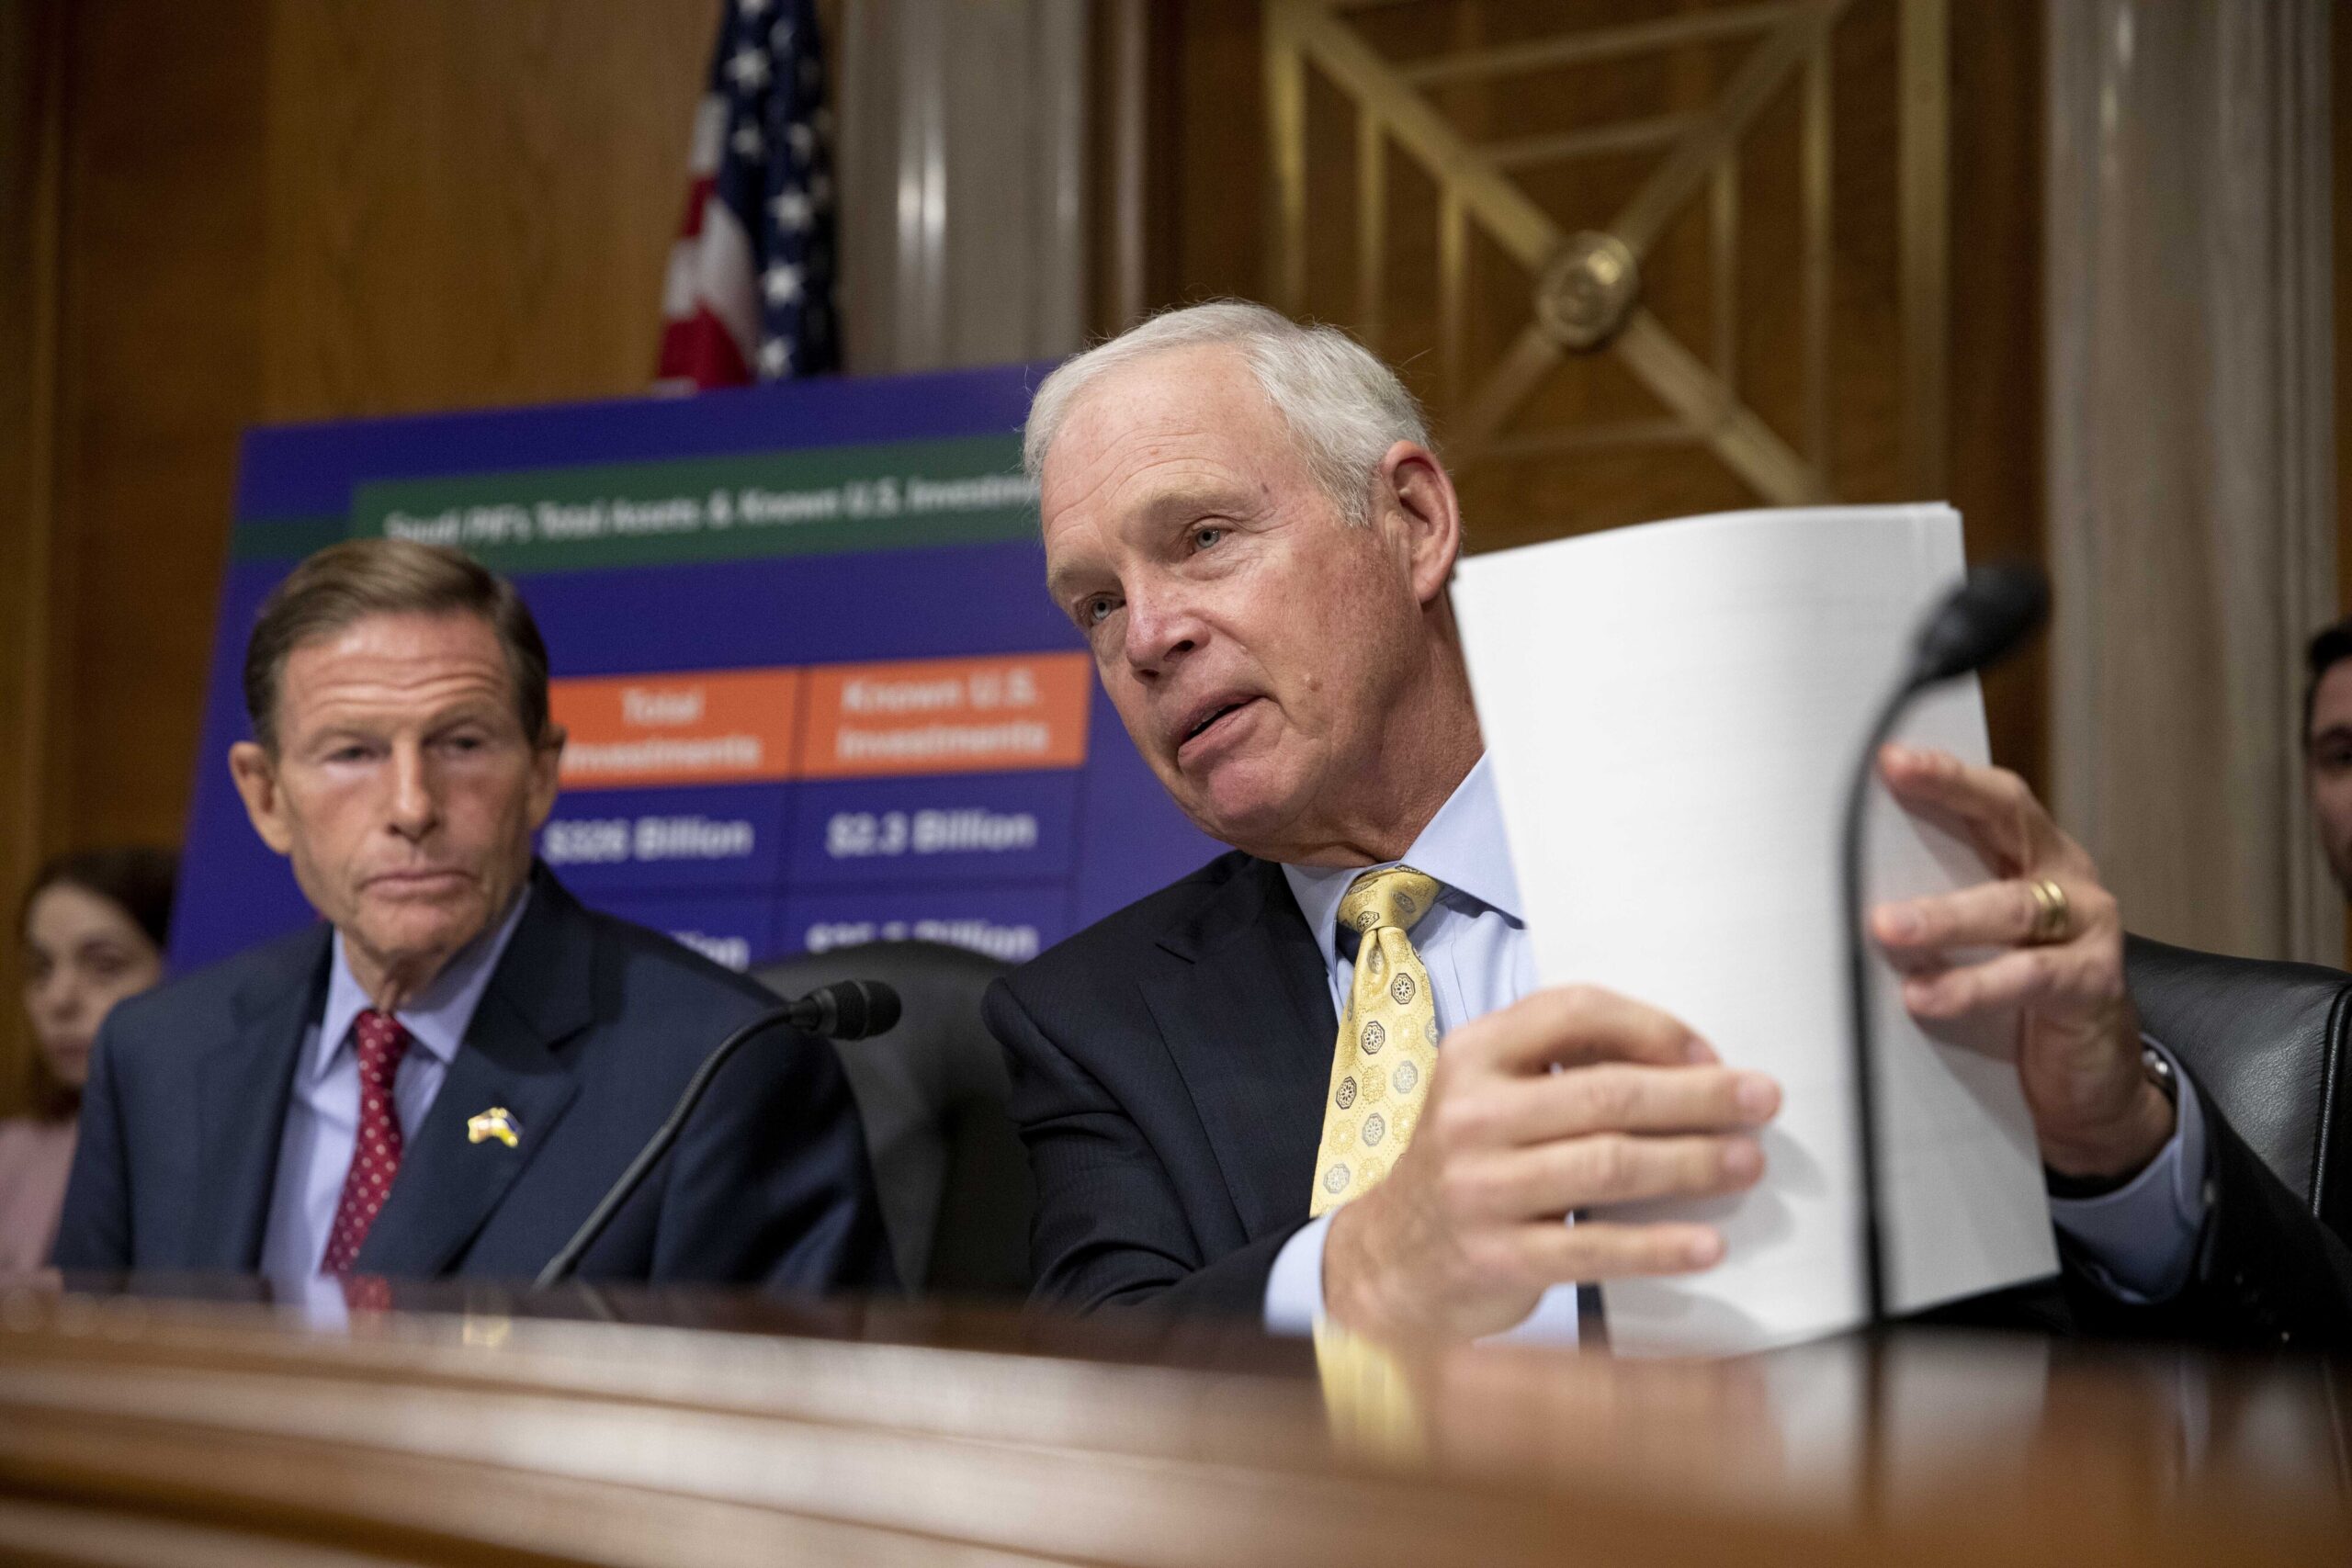 Sen. Ron Johnson holds papers during a congressional subcommittee meeting on Capitol Hill